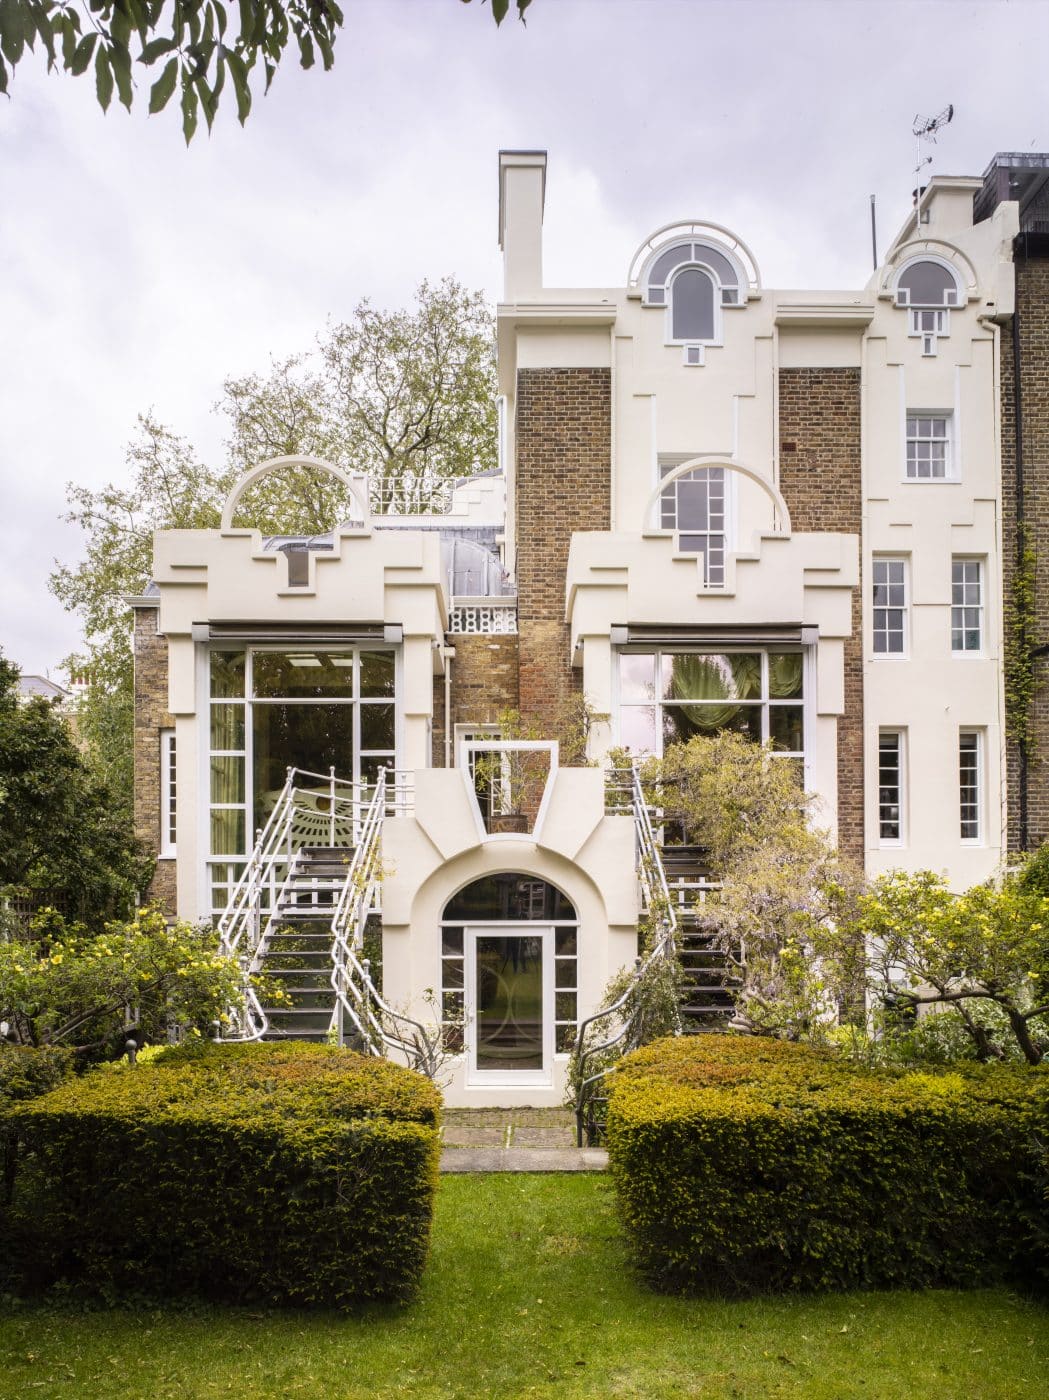 In collaboration with architect Terry Farrell, Charles Jencks turned a four-story Victorian villa in London’s Holland Park neighborhood into a postmodern fantasia